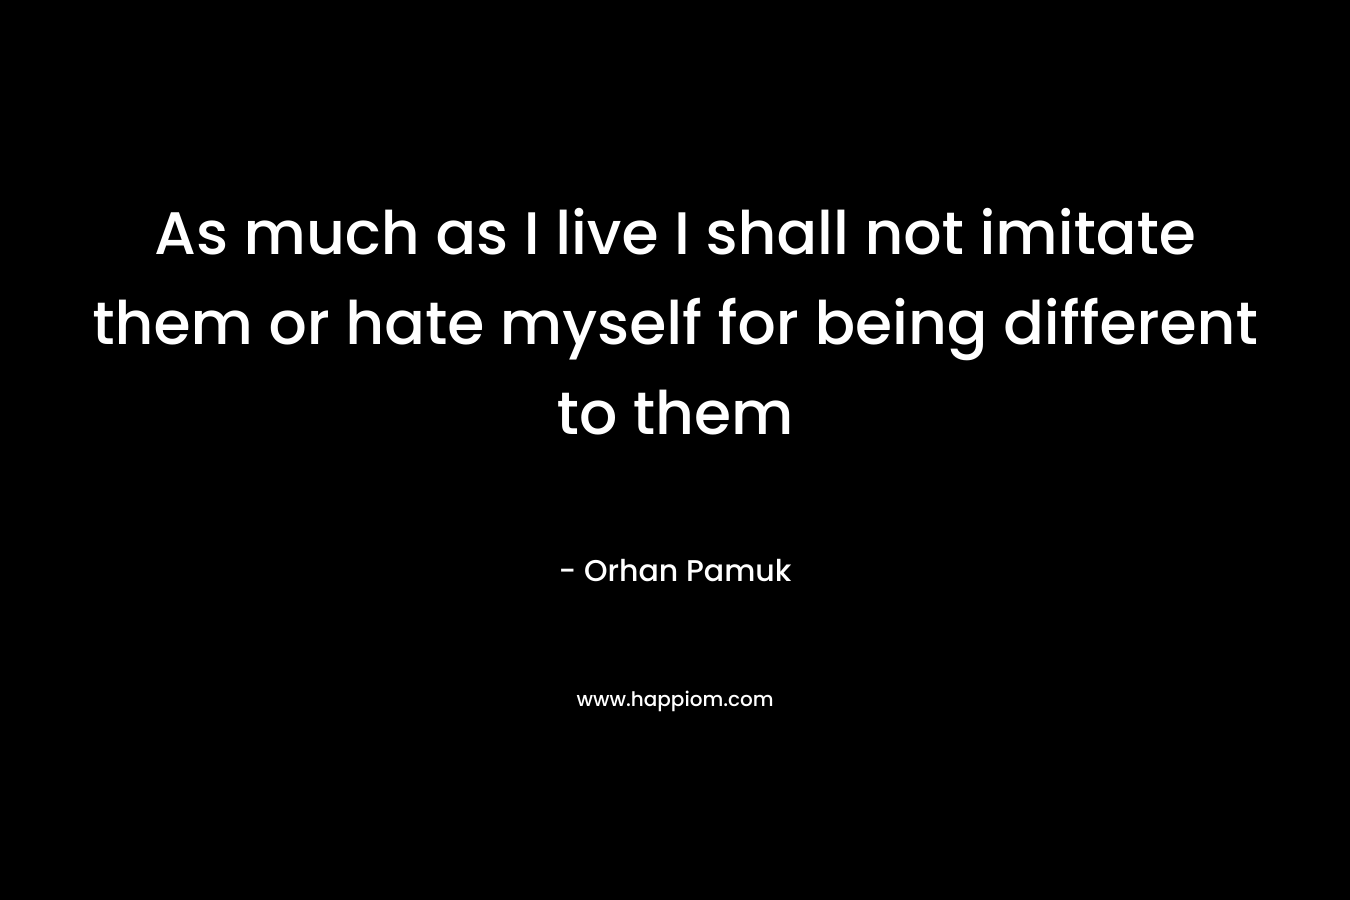 As much as I live I shall not imitate them or hate myself for being different to them – Orhan Pamuk